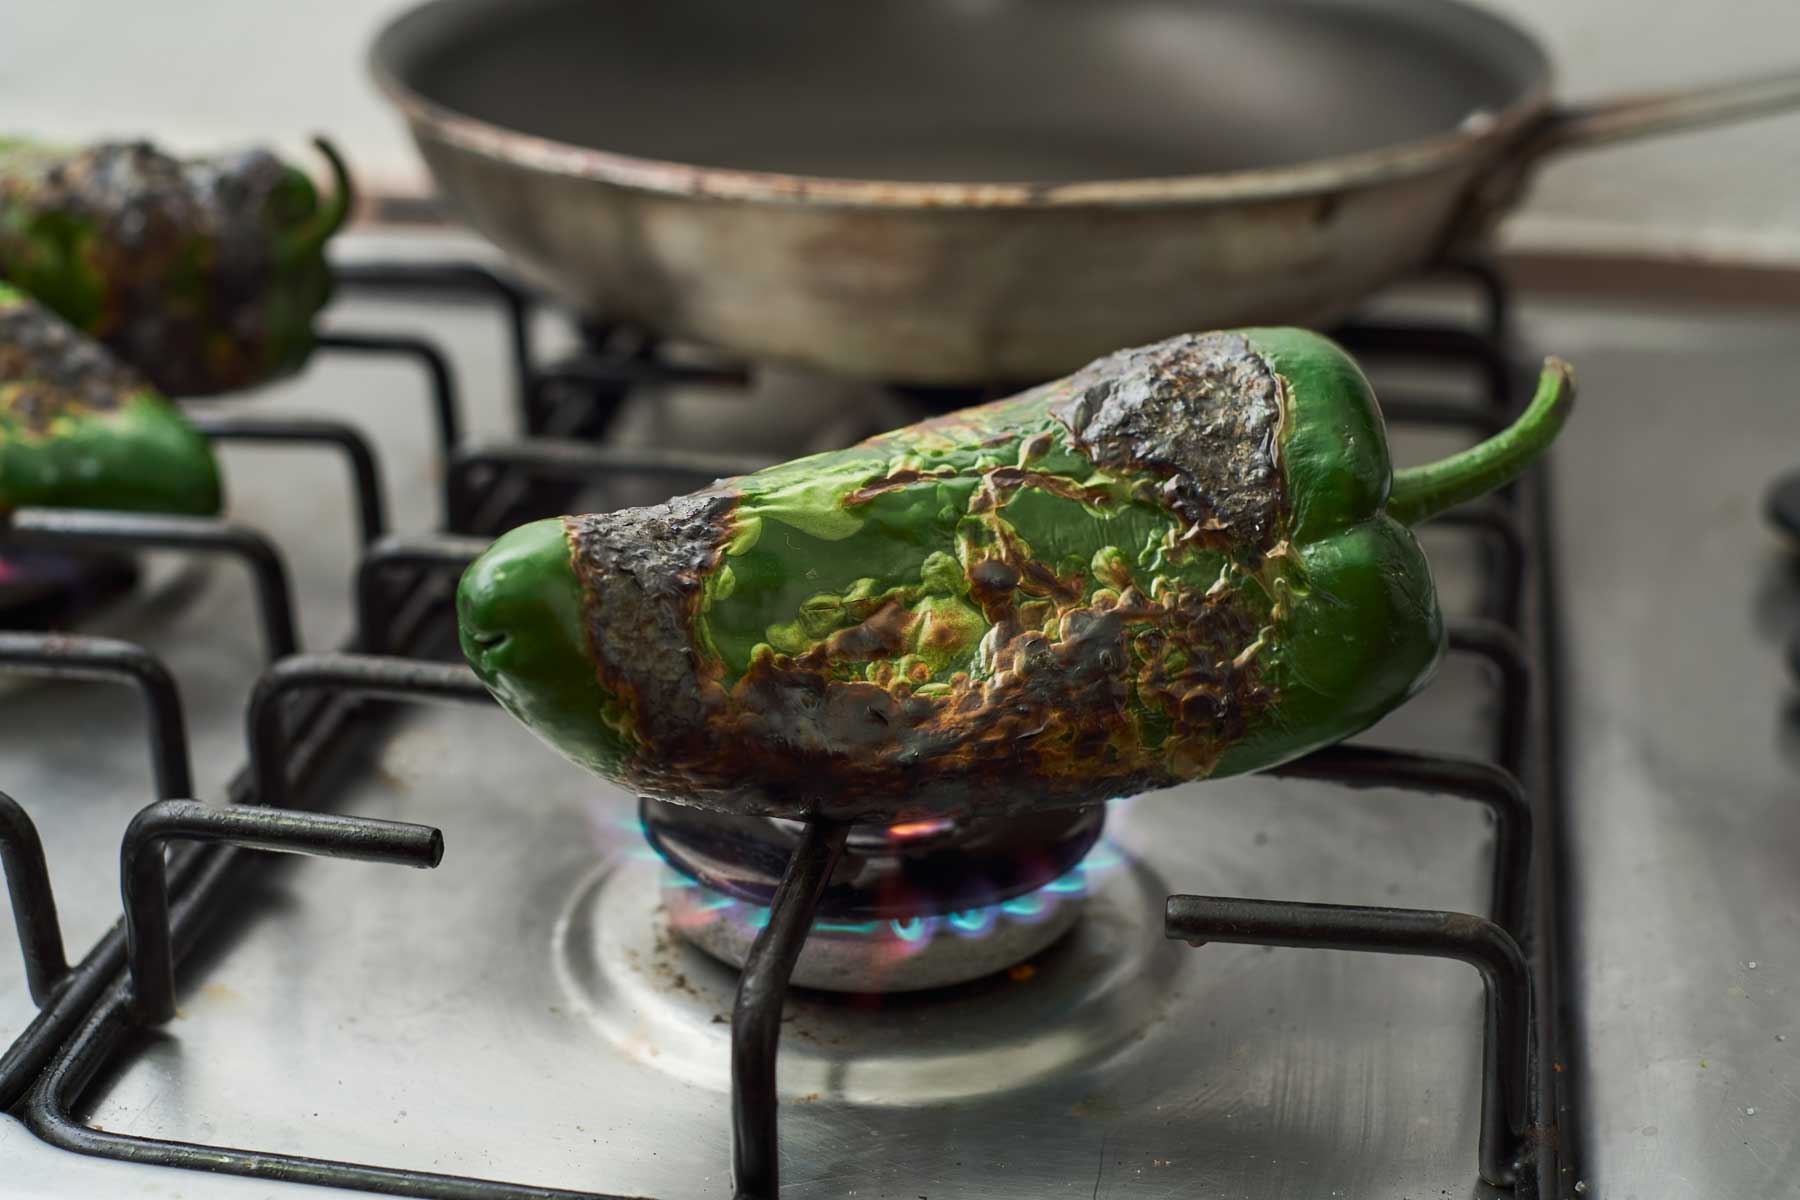 Poblano pepper charring on an open flame on the stovetop